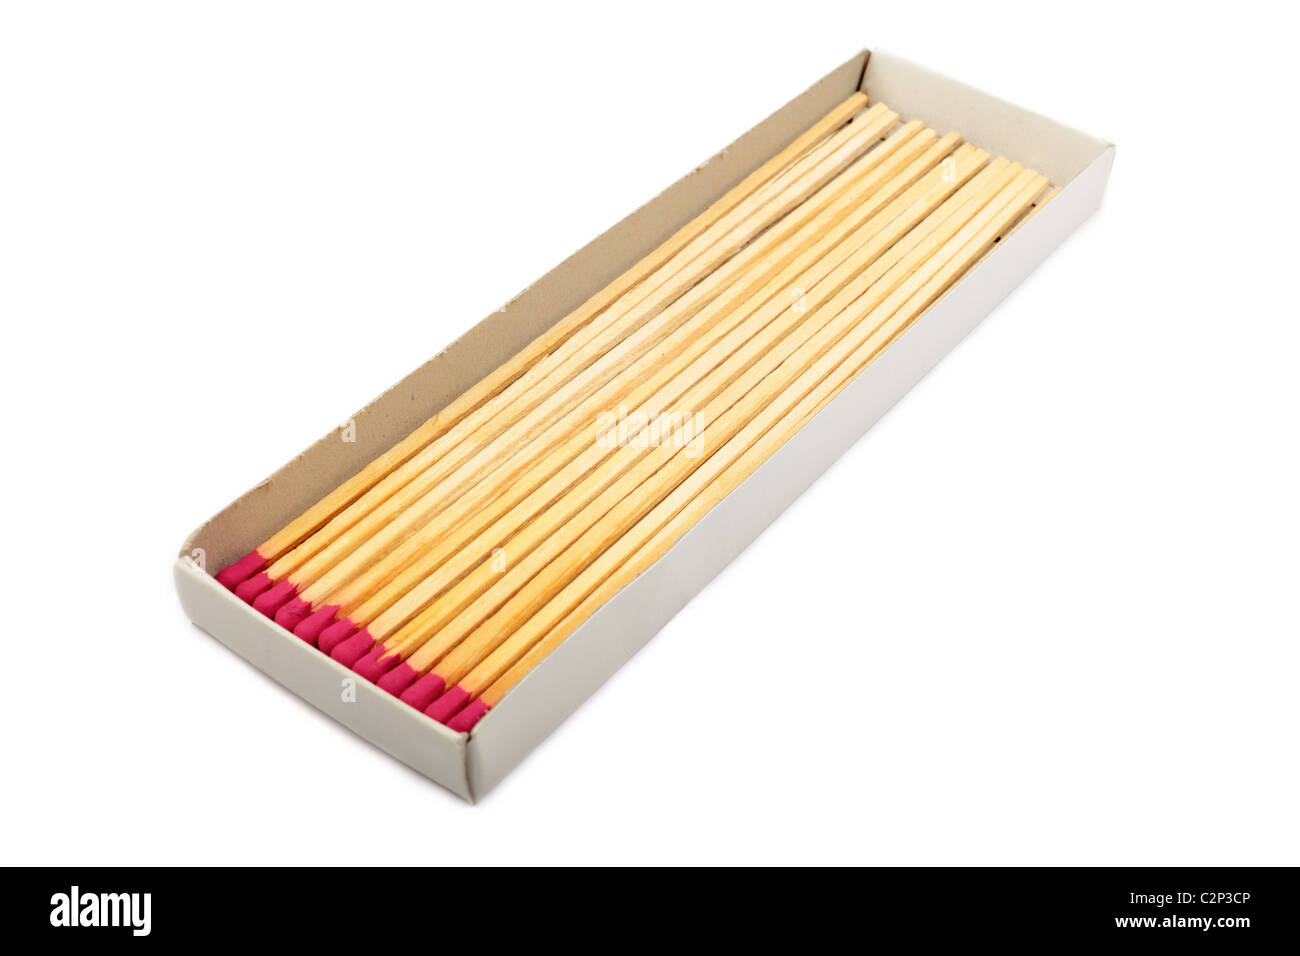 Long matches in a box isolated on white background. Stock Photo